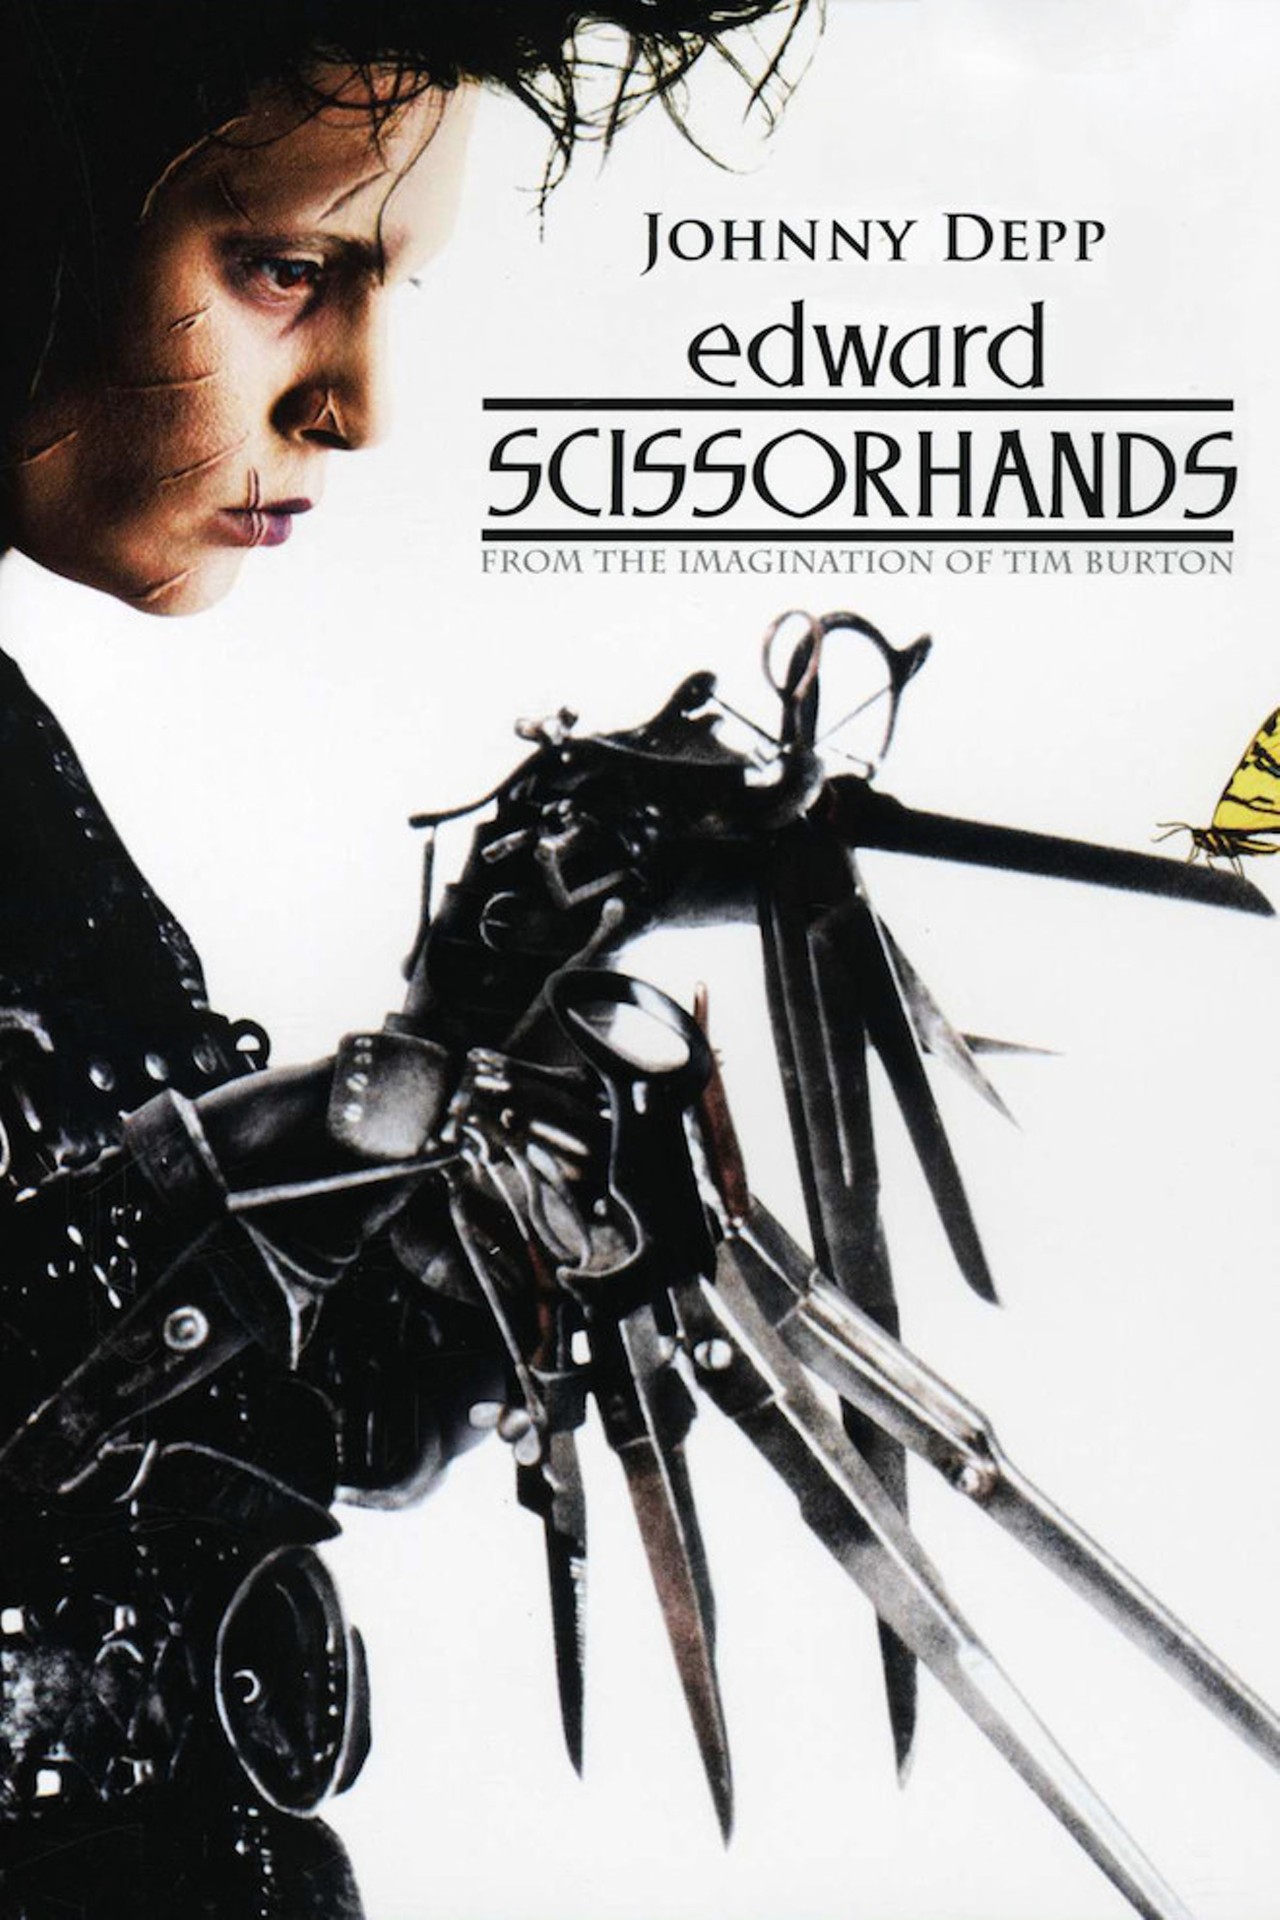 Location Matters: the shopping center from &#145;Edward Scissorhands&#146;via